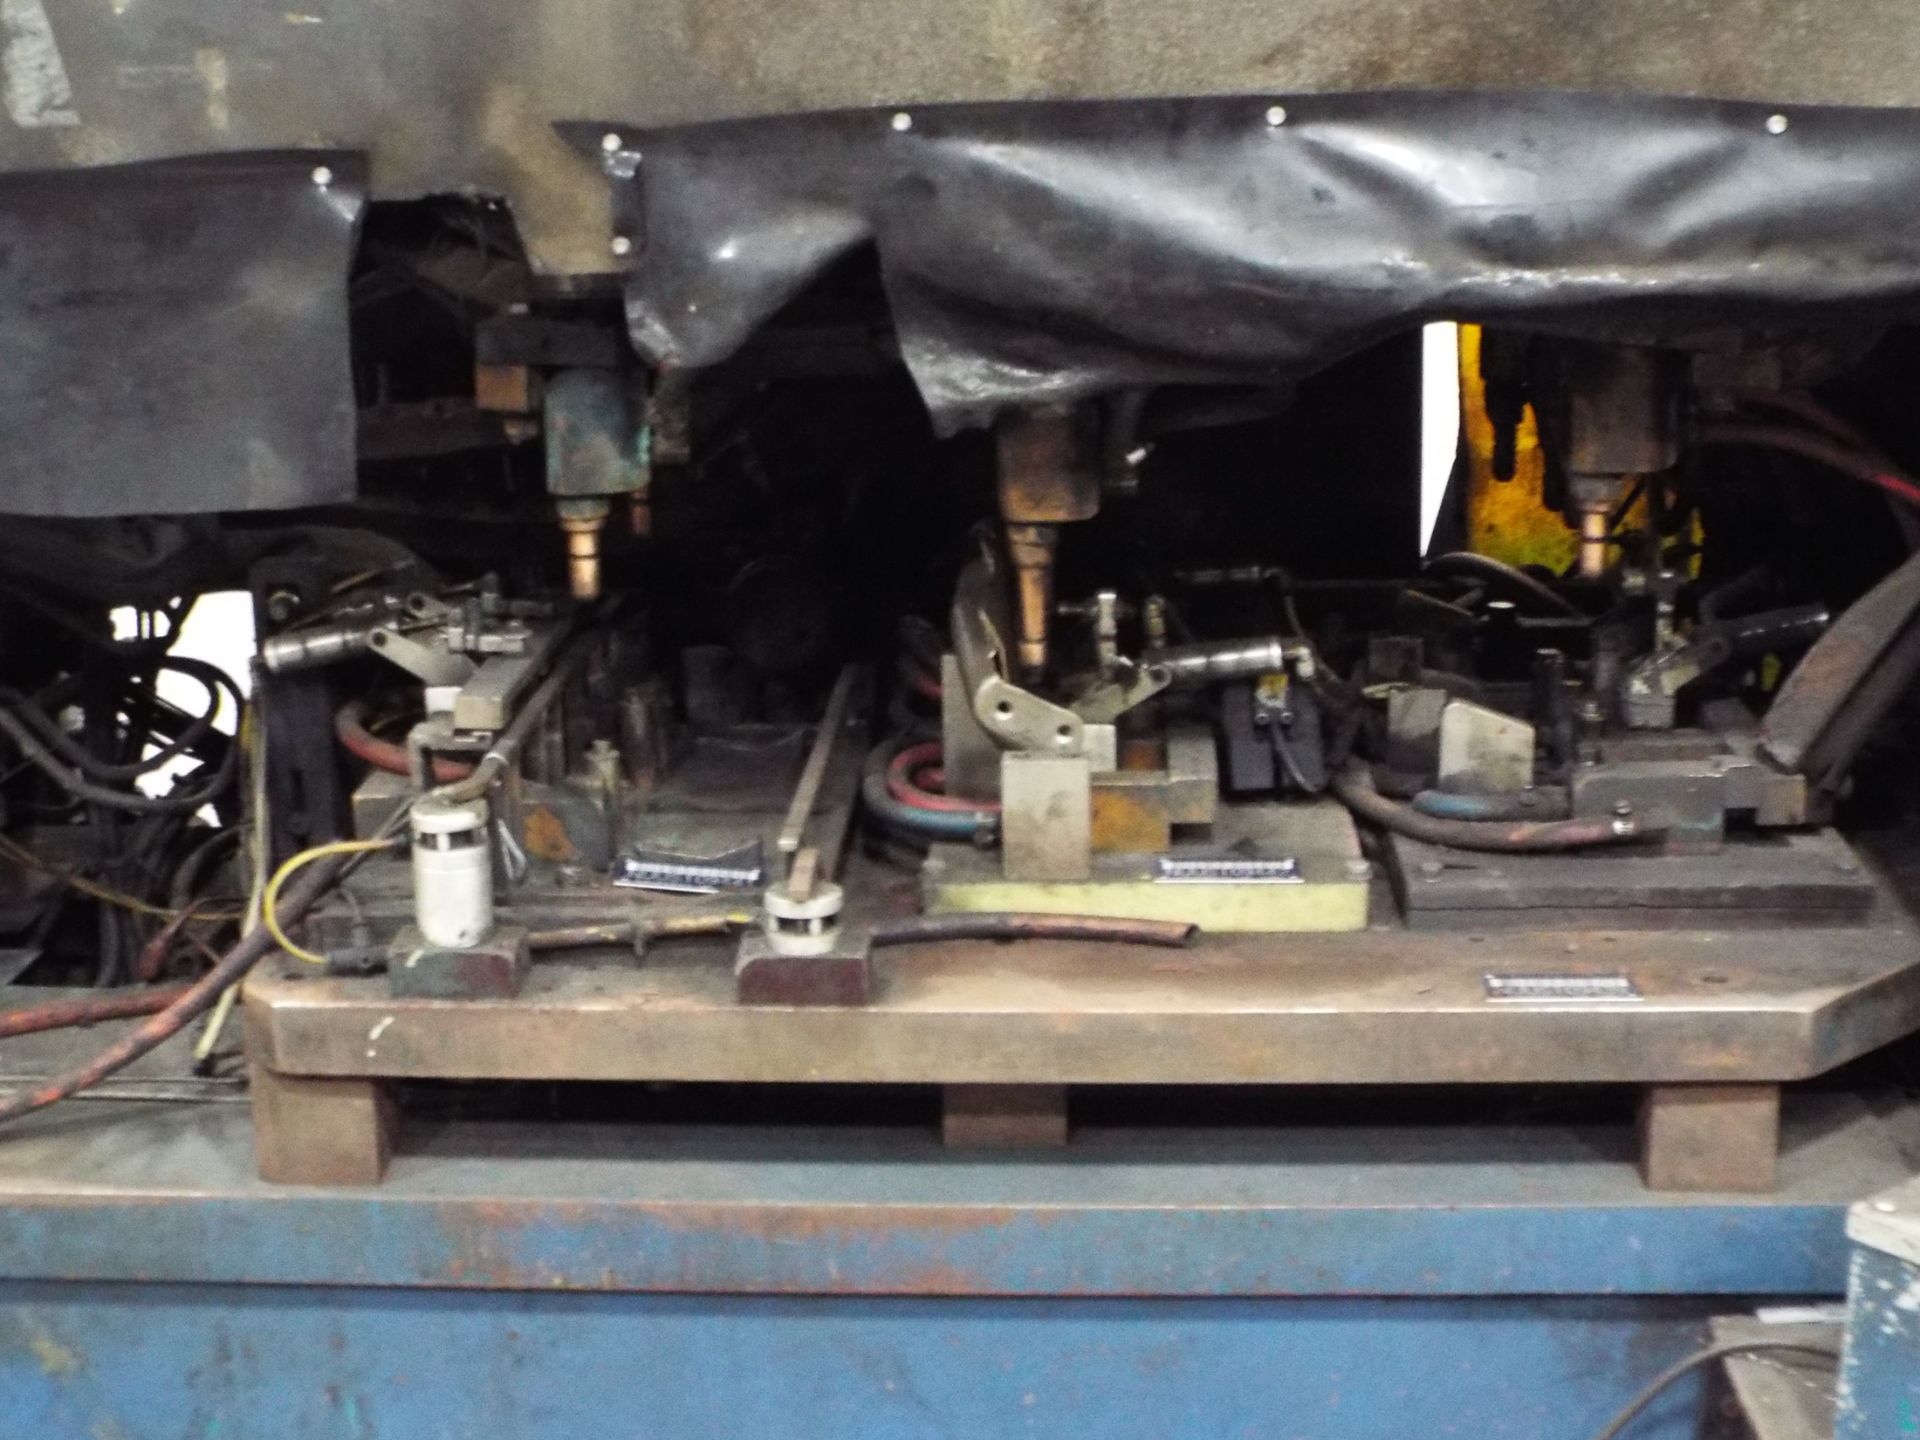 DIXIE TOOL & DIE 80 KVA 3 HEAD ASSEMBLY WELDER WITH ALLEN-BRADLEY PANELVIEW 550 TOUCH SCREEN PLC - Image 3 of 3